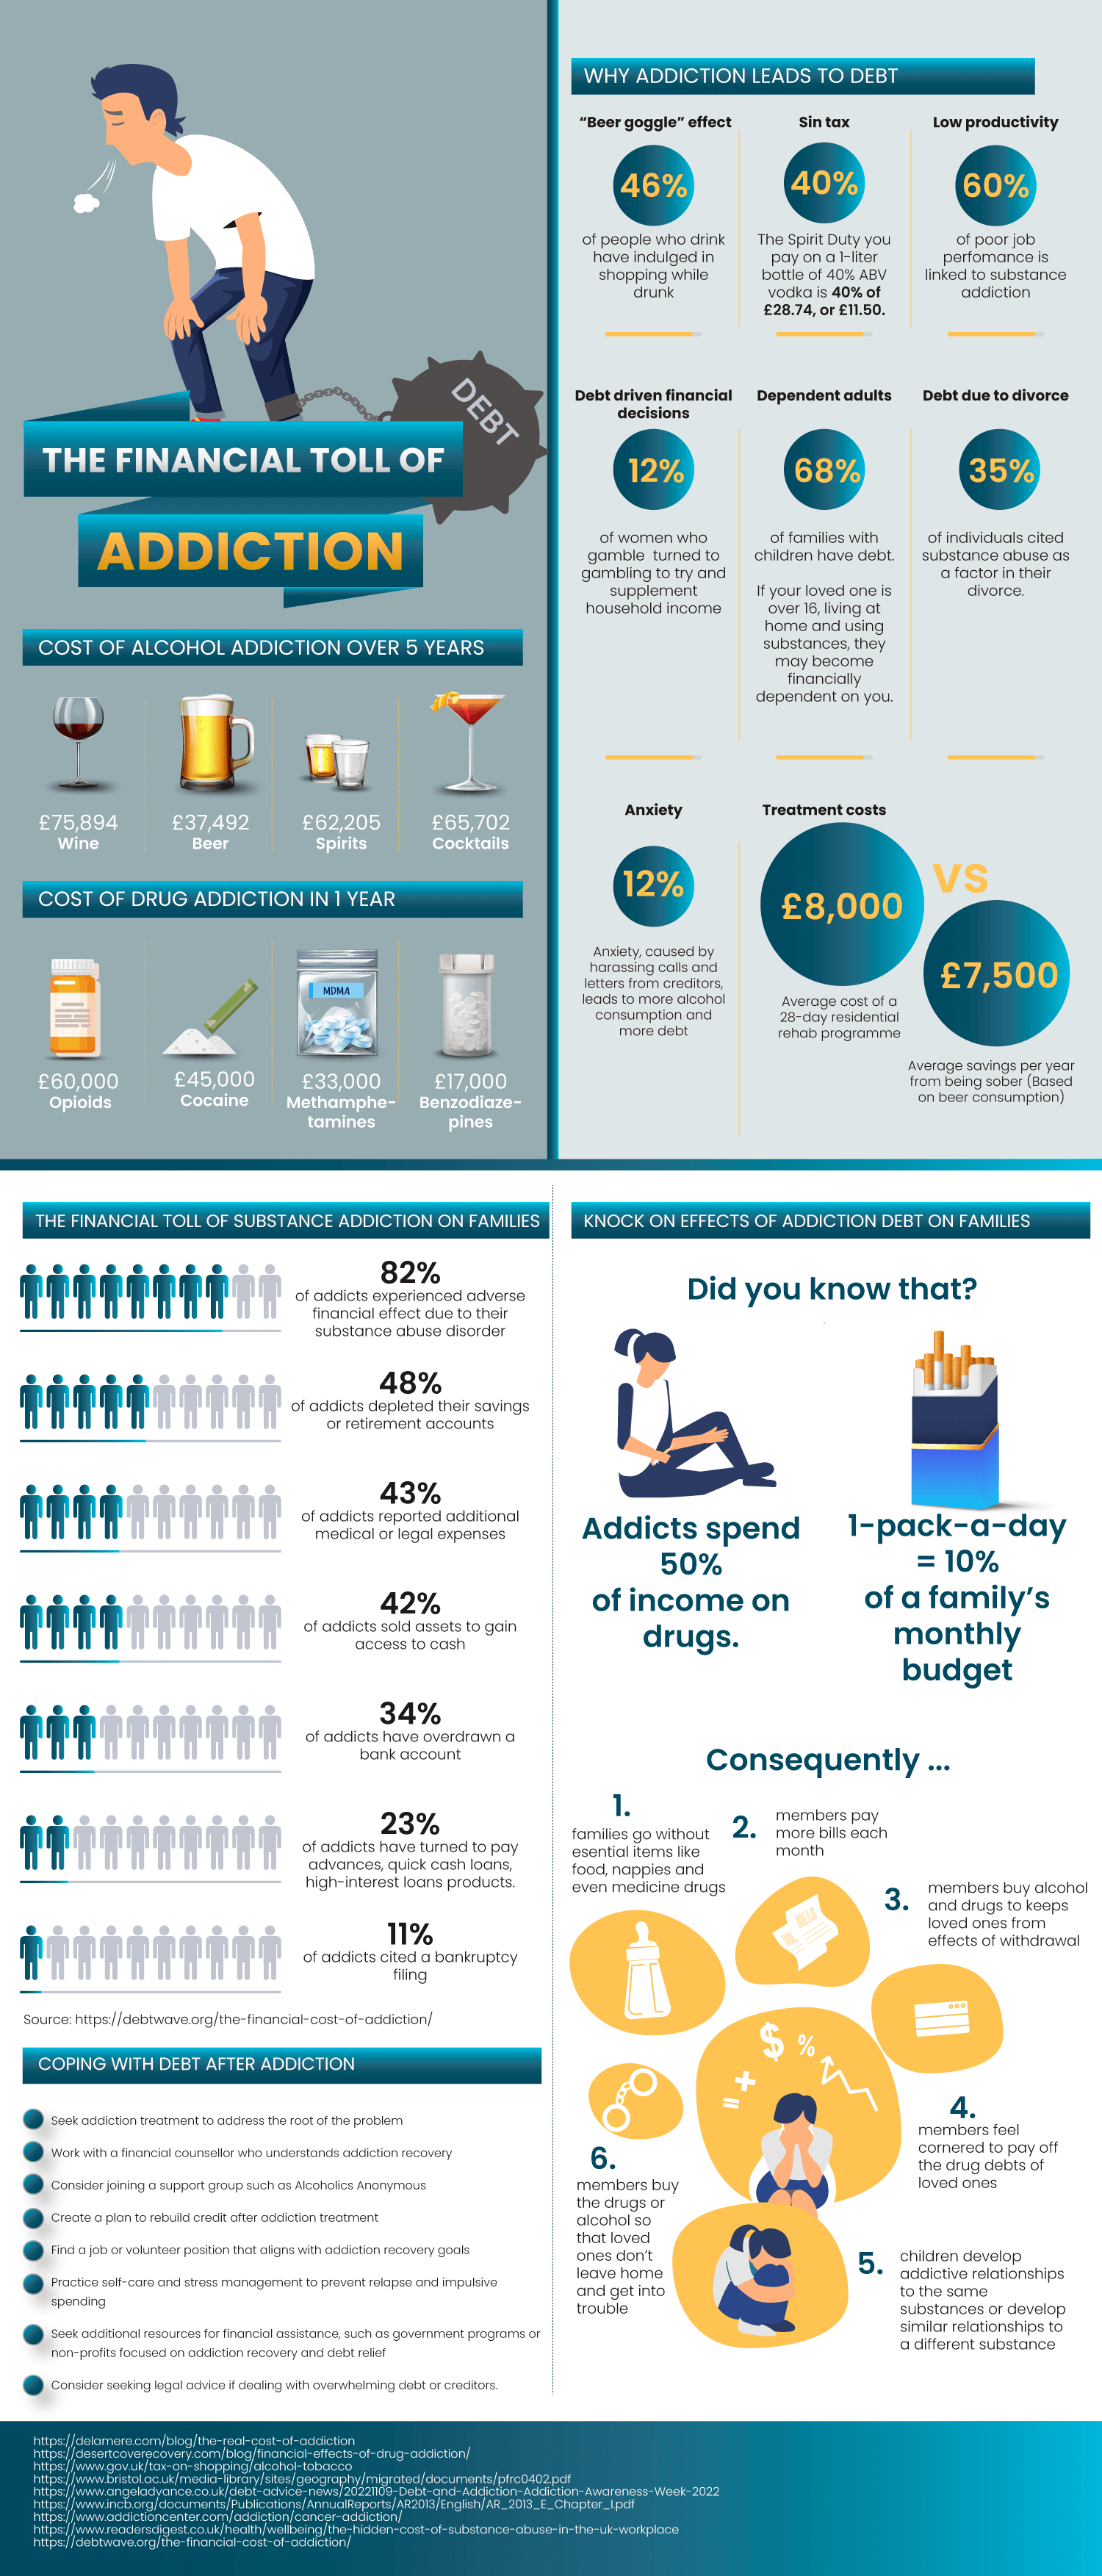 The Financial Toll of Addiction